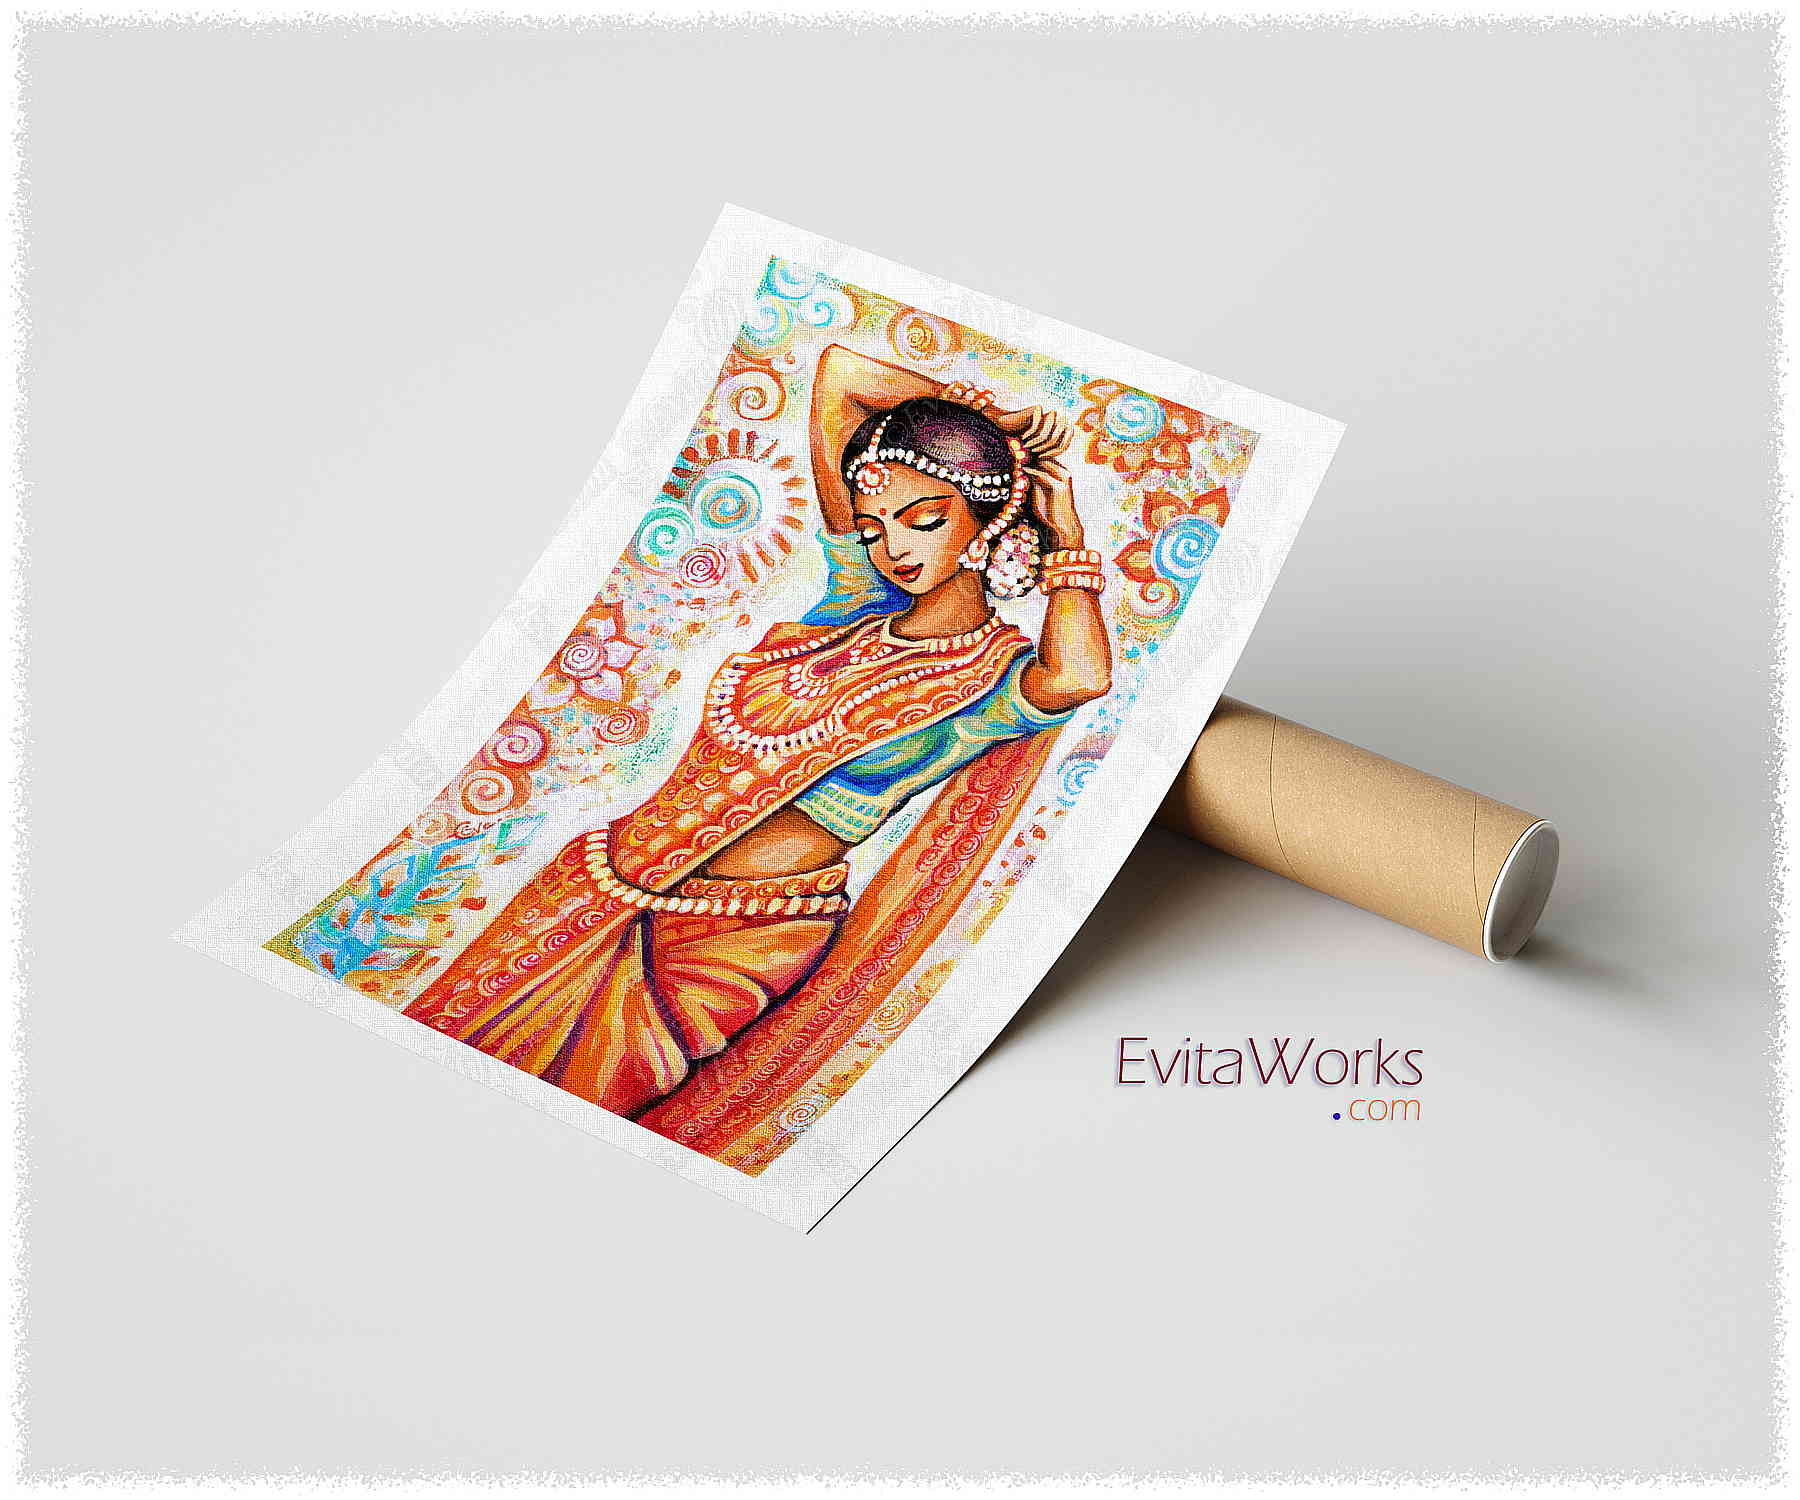 Hit to learn about "Aroma of Saffron, Indian girl" on prints